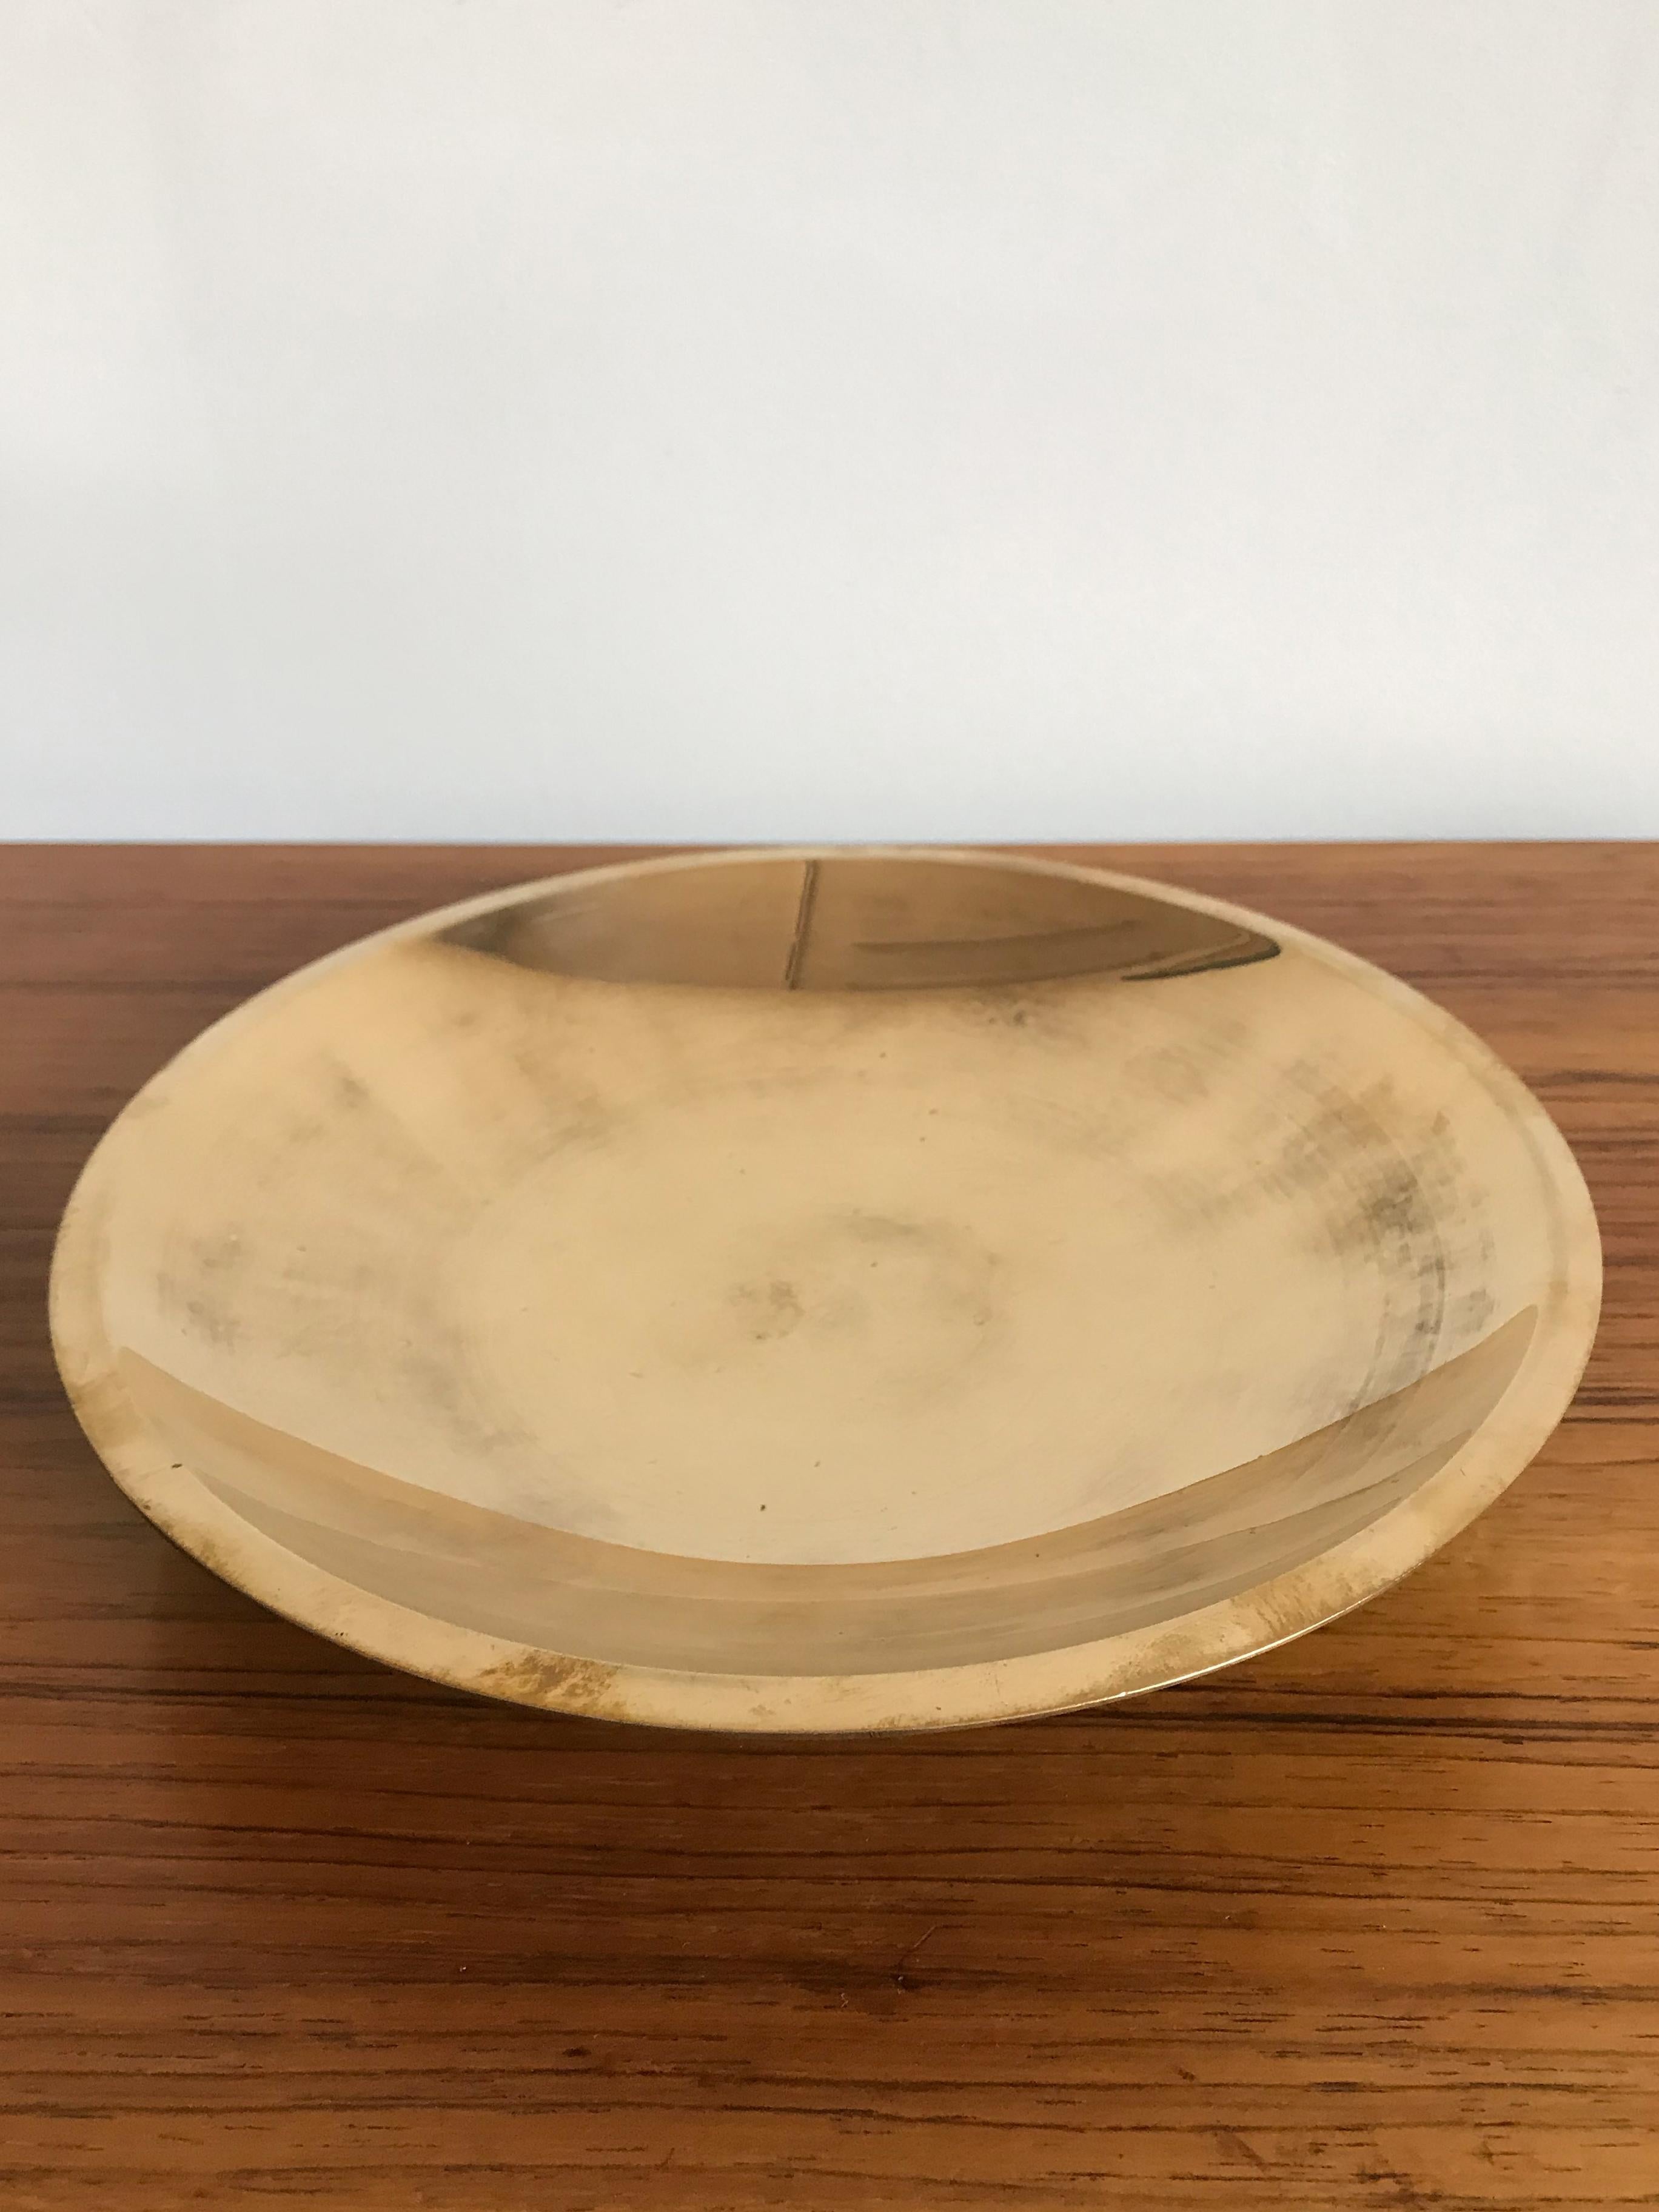 Scandinavian bronze dish or bowl designed by Just Anderson, Denmark, 1930s
Signed Just Anderson under the base.

Please note that the items are original of the period and this shows normal signs of age and use.

Just Andersen was born in 1884